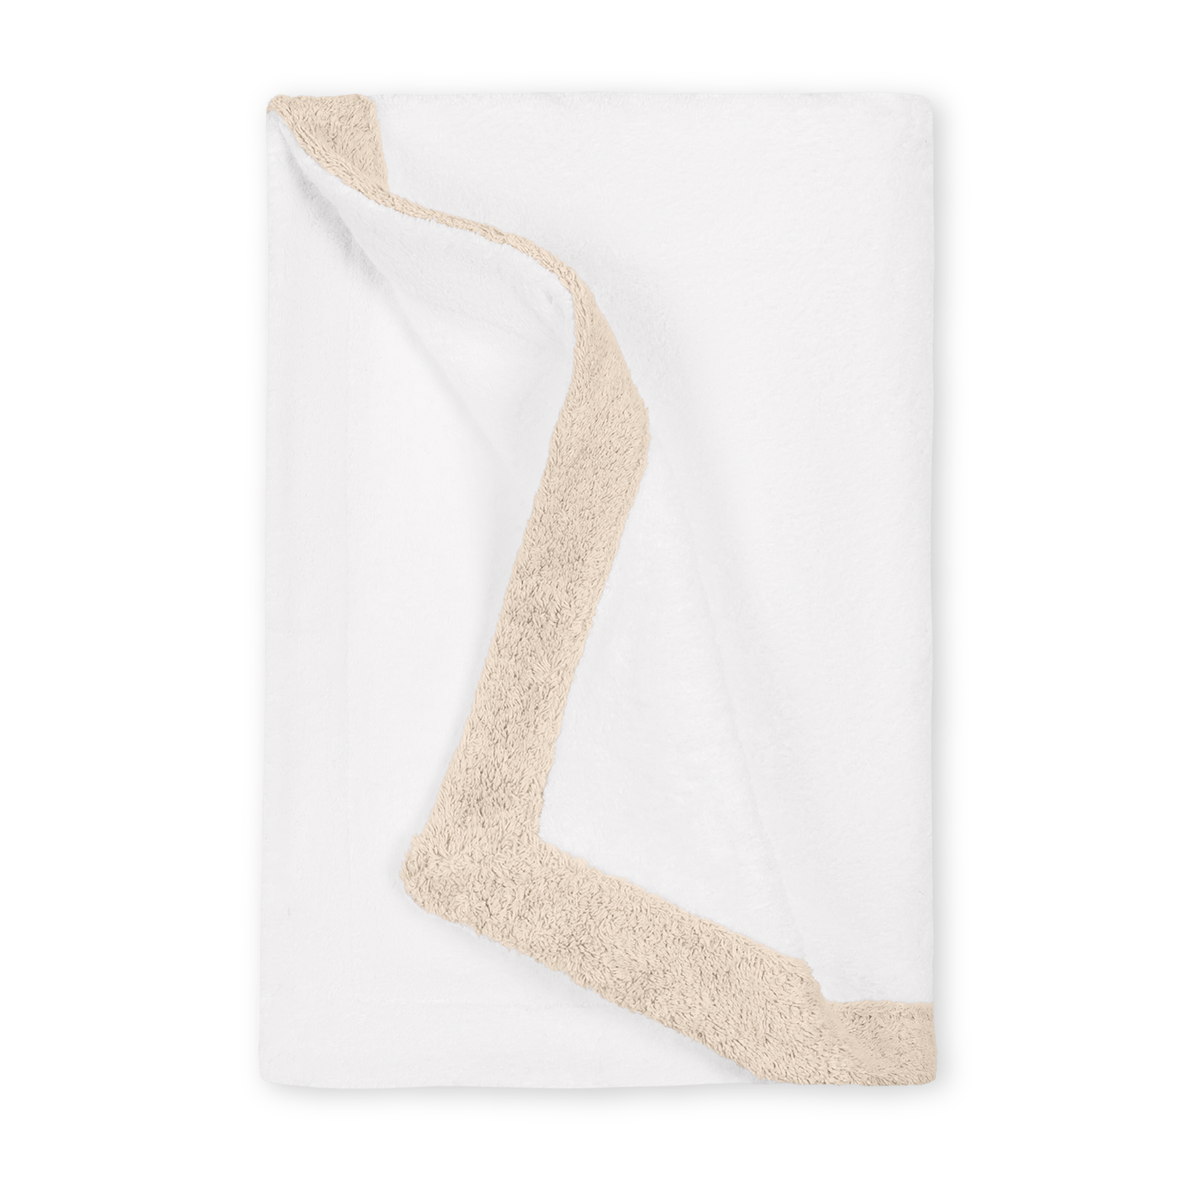 Folded Matouk Helios Beach Towels in White/Sand Color